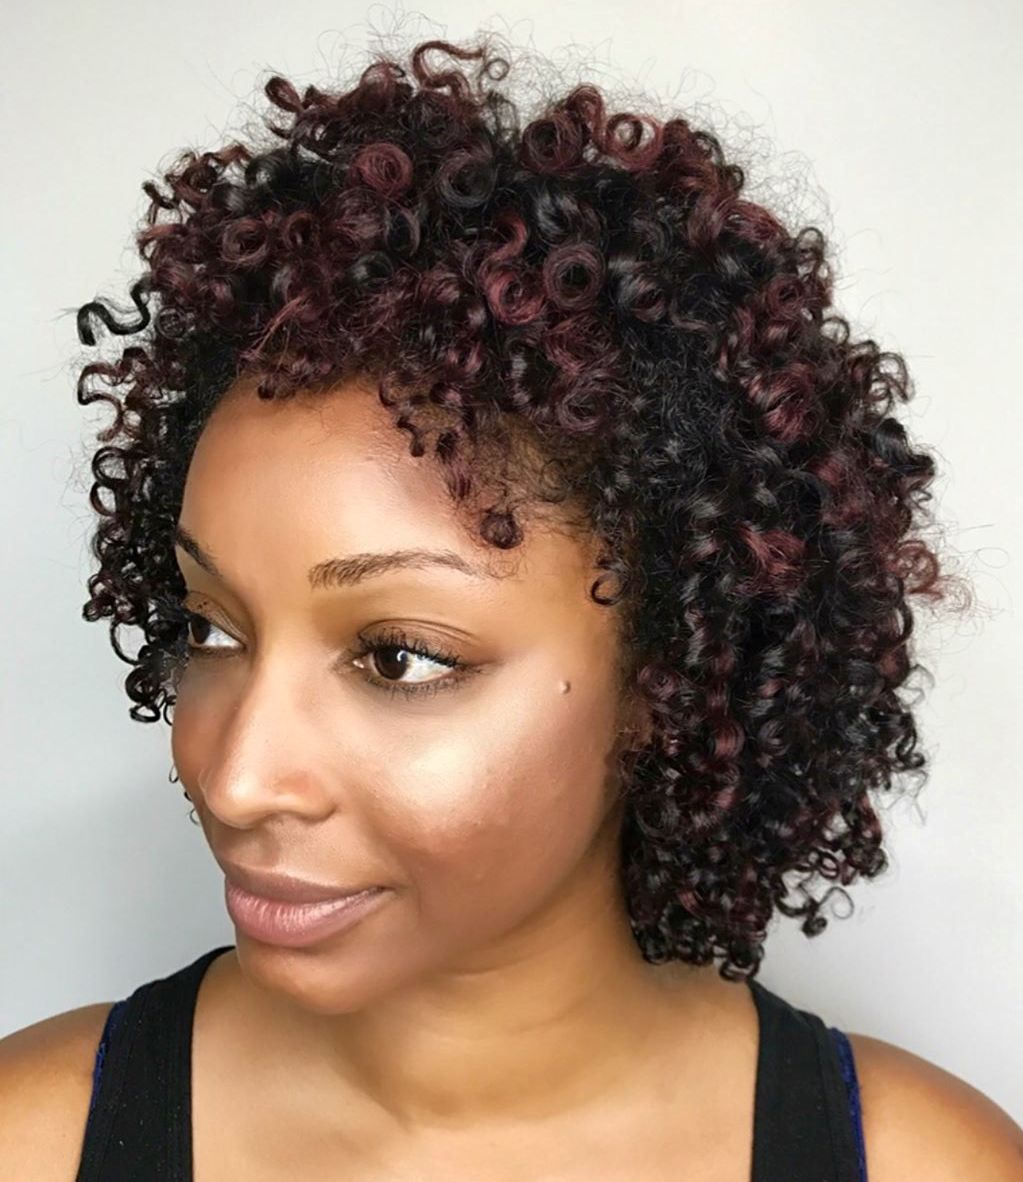 45 Classy Natural Hairstyles For Black Girls To Turn Heads In 2021 That's why we've collected some short hairstyles for black women that can reveal the. natural hairstyles for black girls